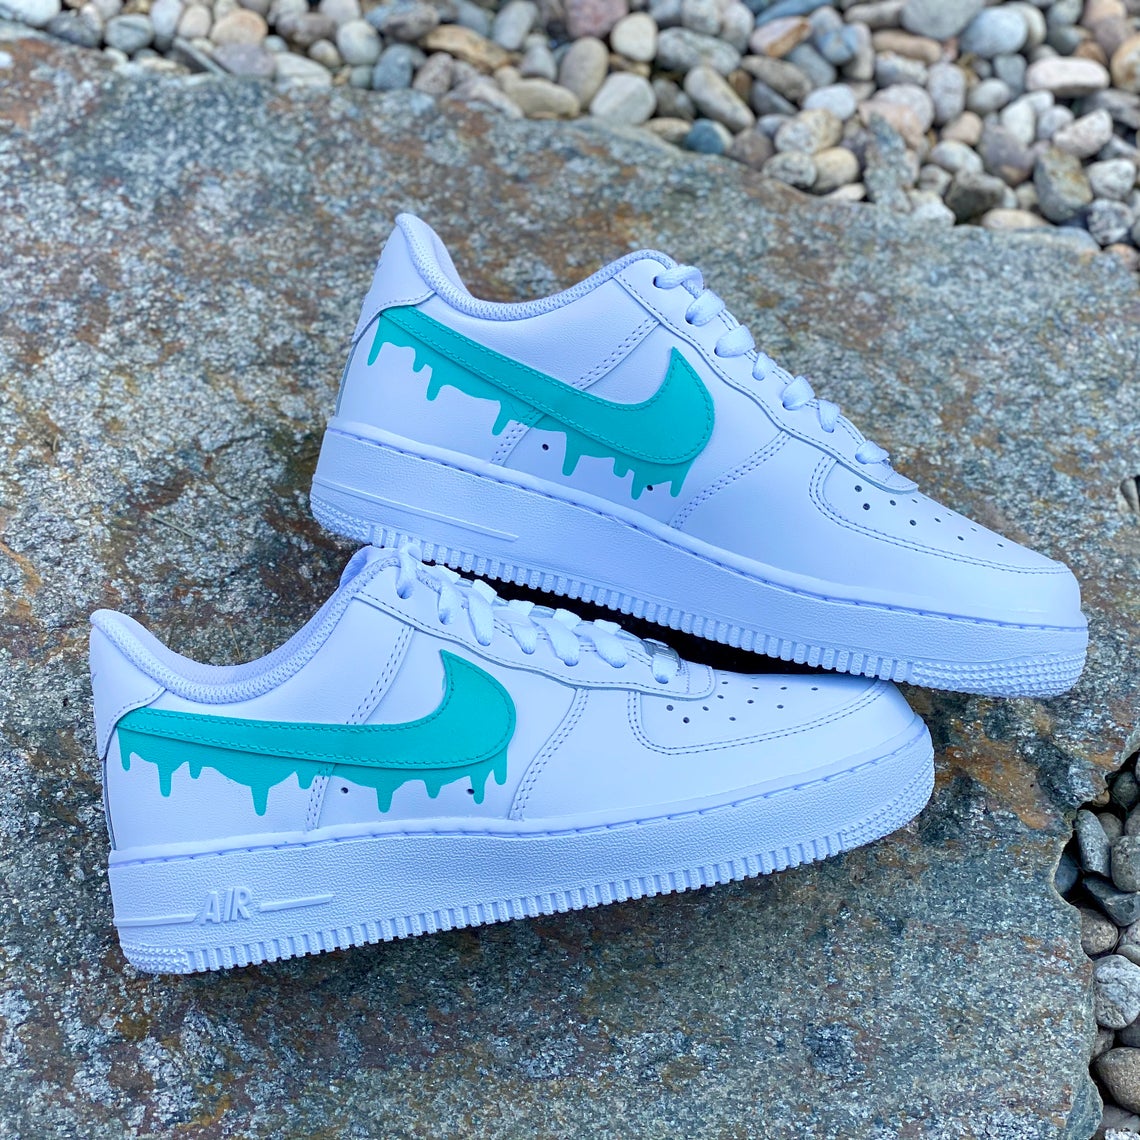 Air Force 1 Custom Low Teal Drip White Shoes Men Women Kids All Sizes AF1 Sneakers